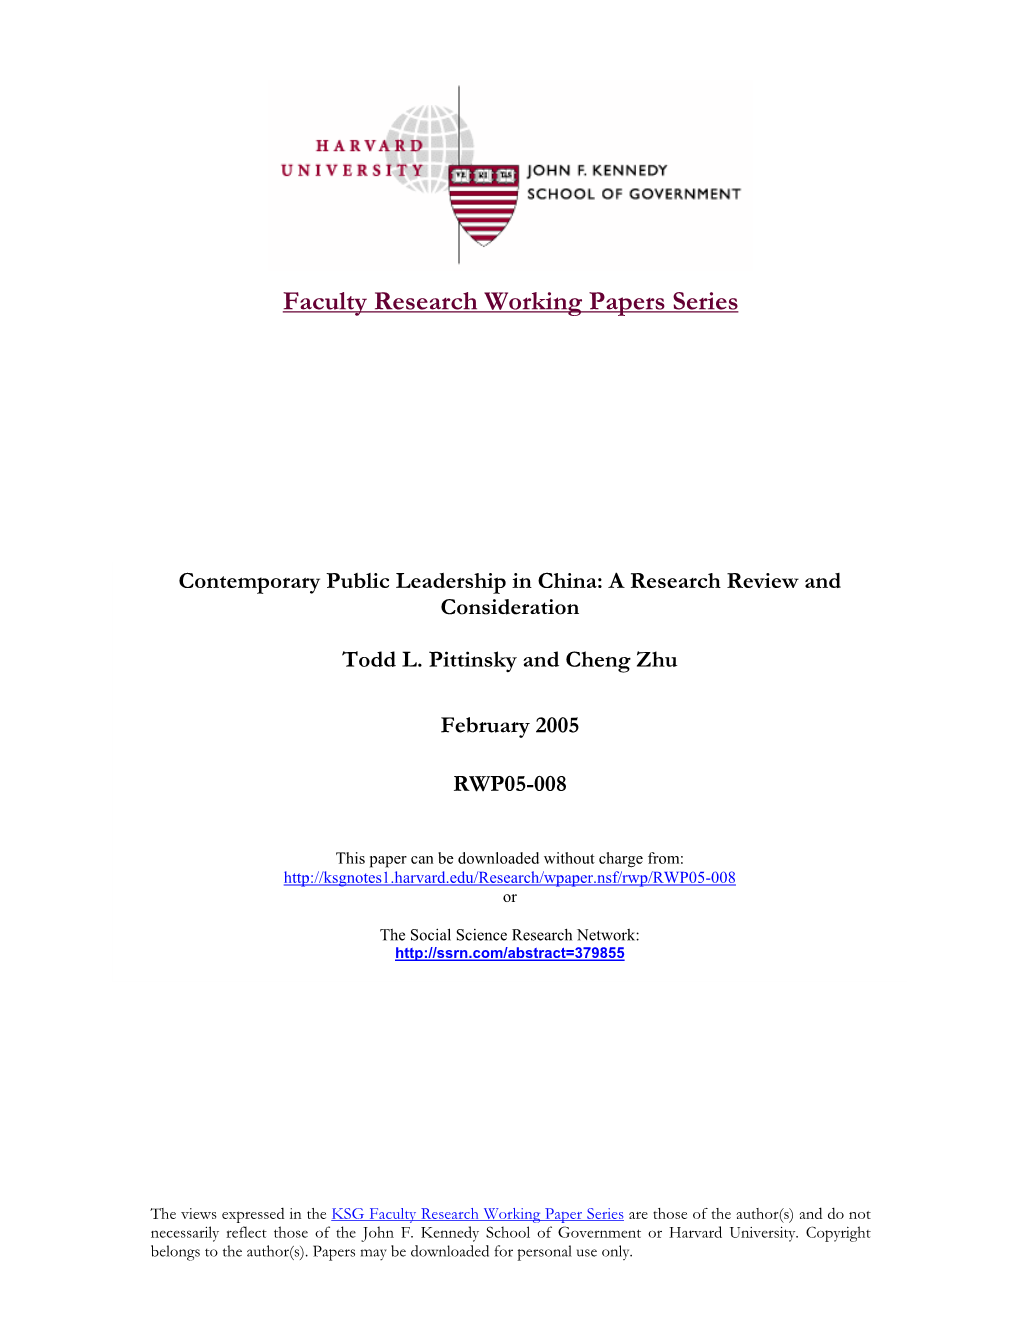 Contemporary Public Leadership in China: a Research Review And